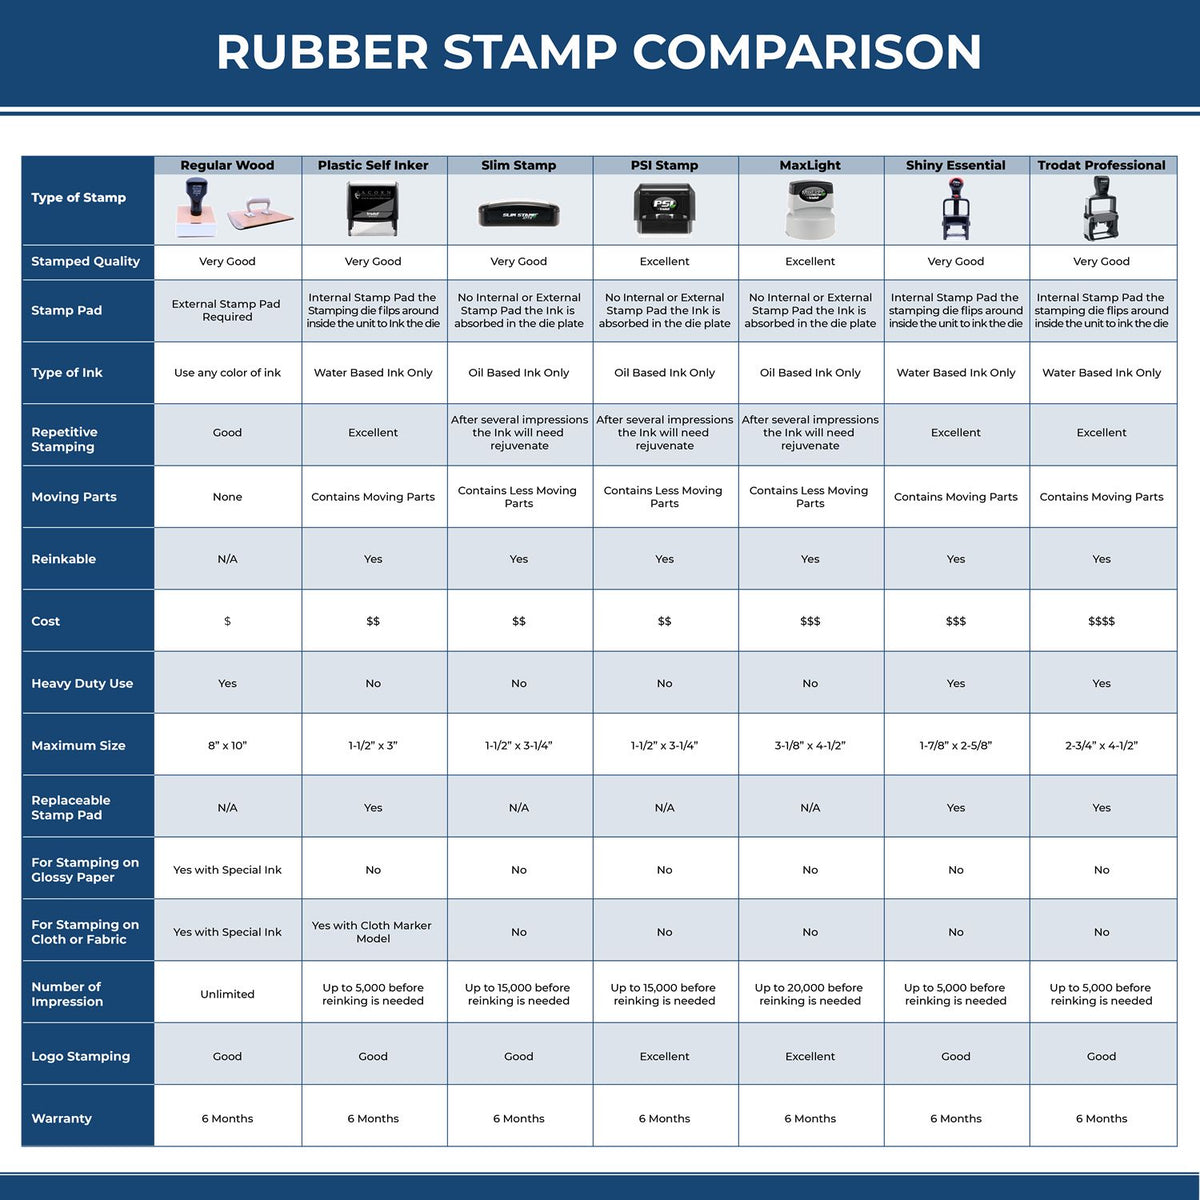 Large Please Pay Now No Statements Rubber Stamp 4988R Rubber Stamp Comparison